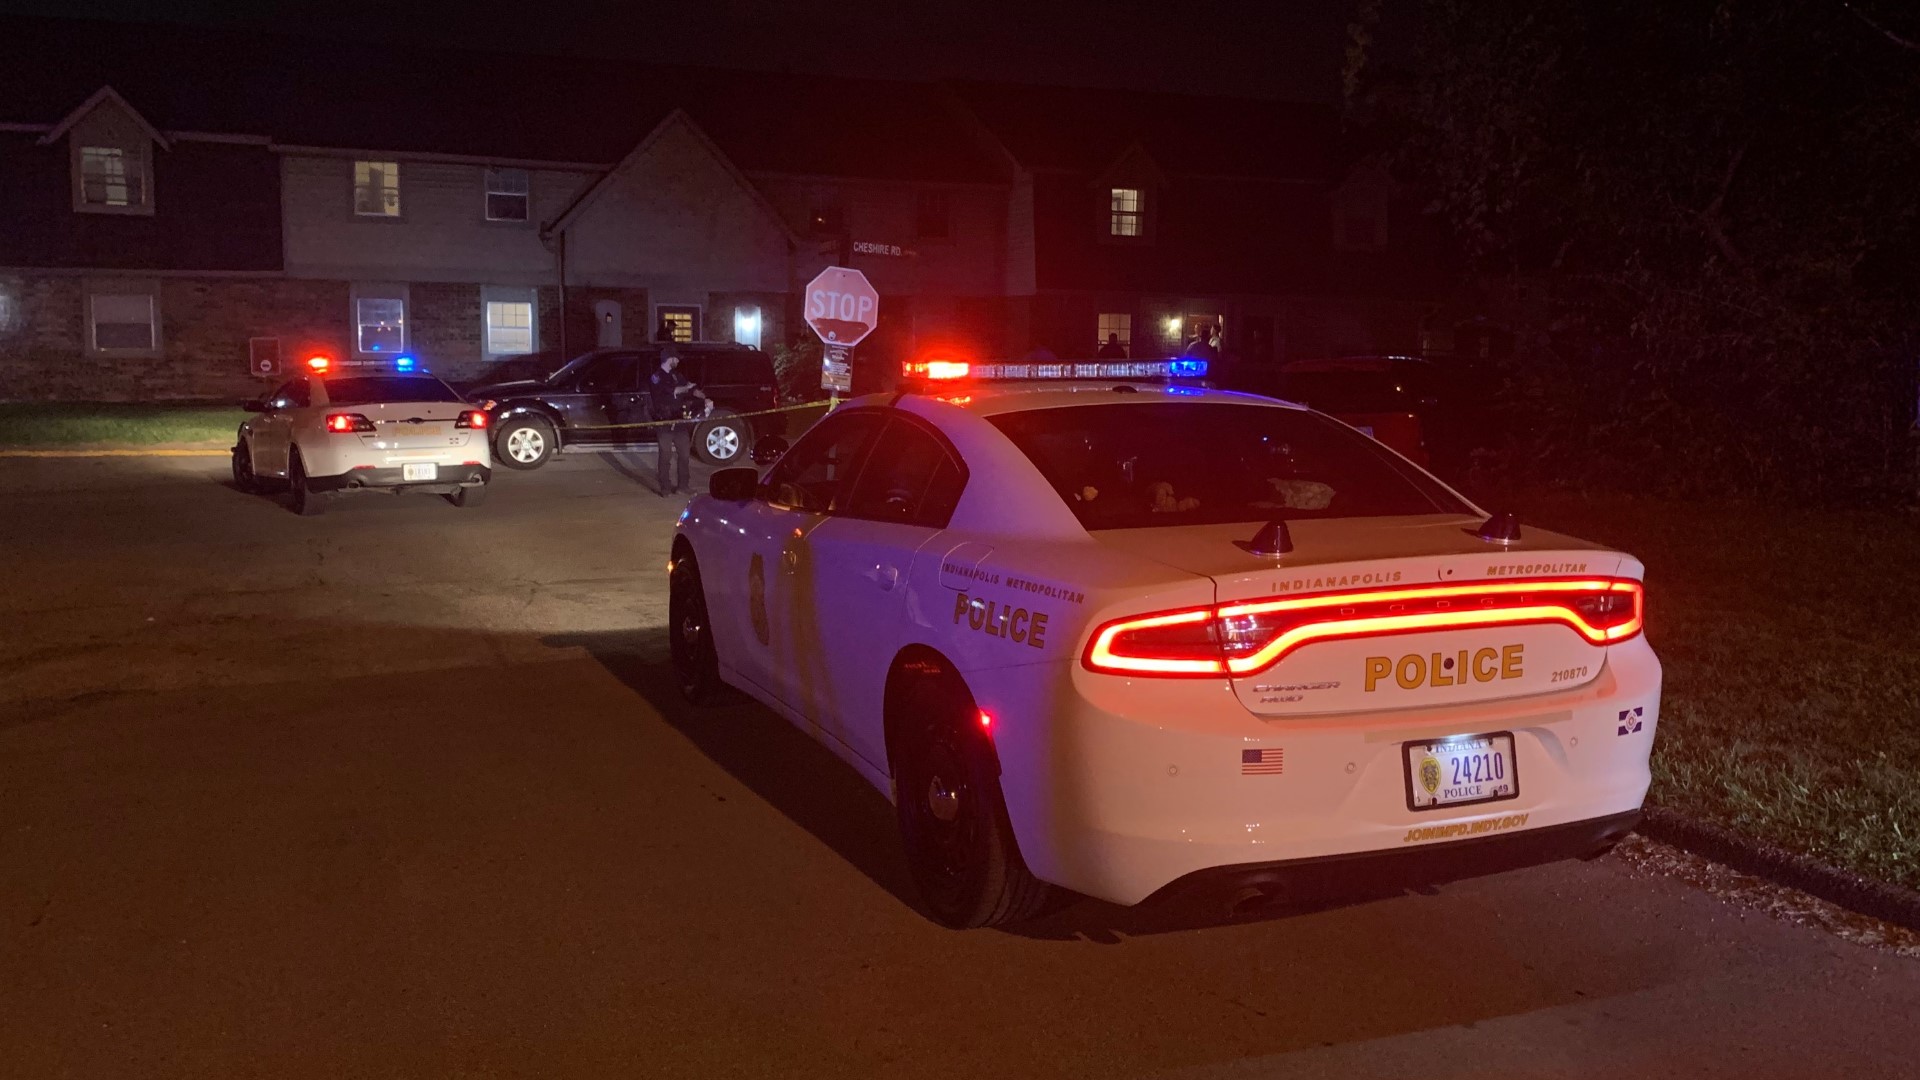 Police were called to the 6100 block of Cheshire Road just before 10 p.m.